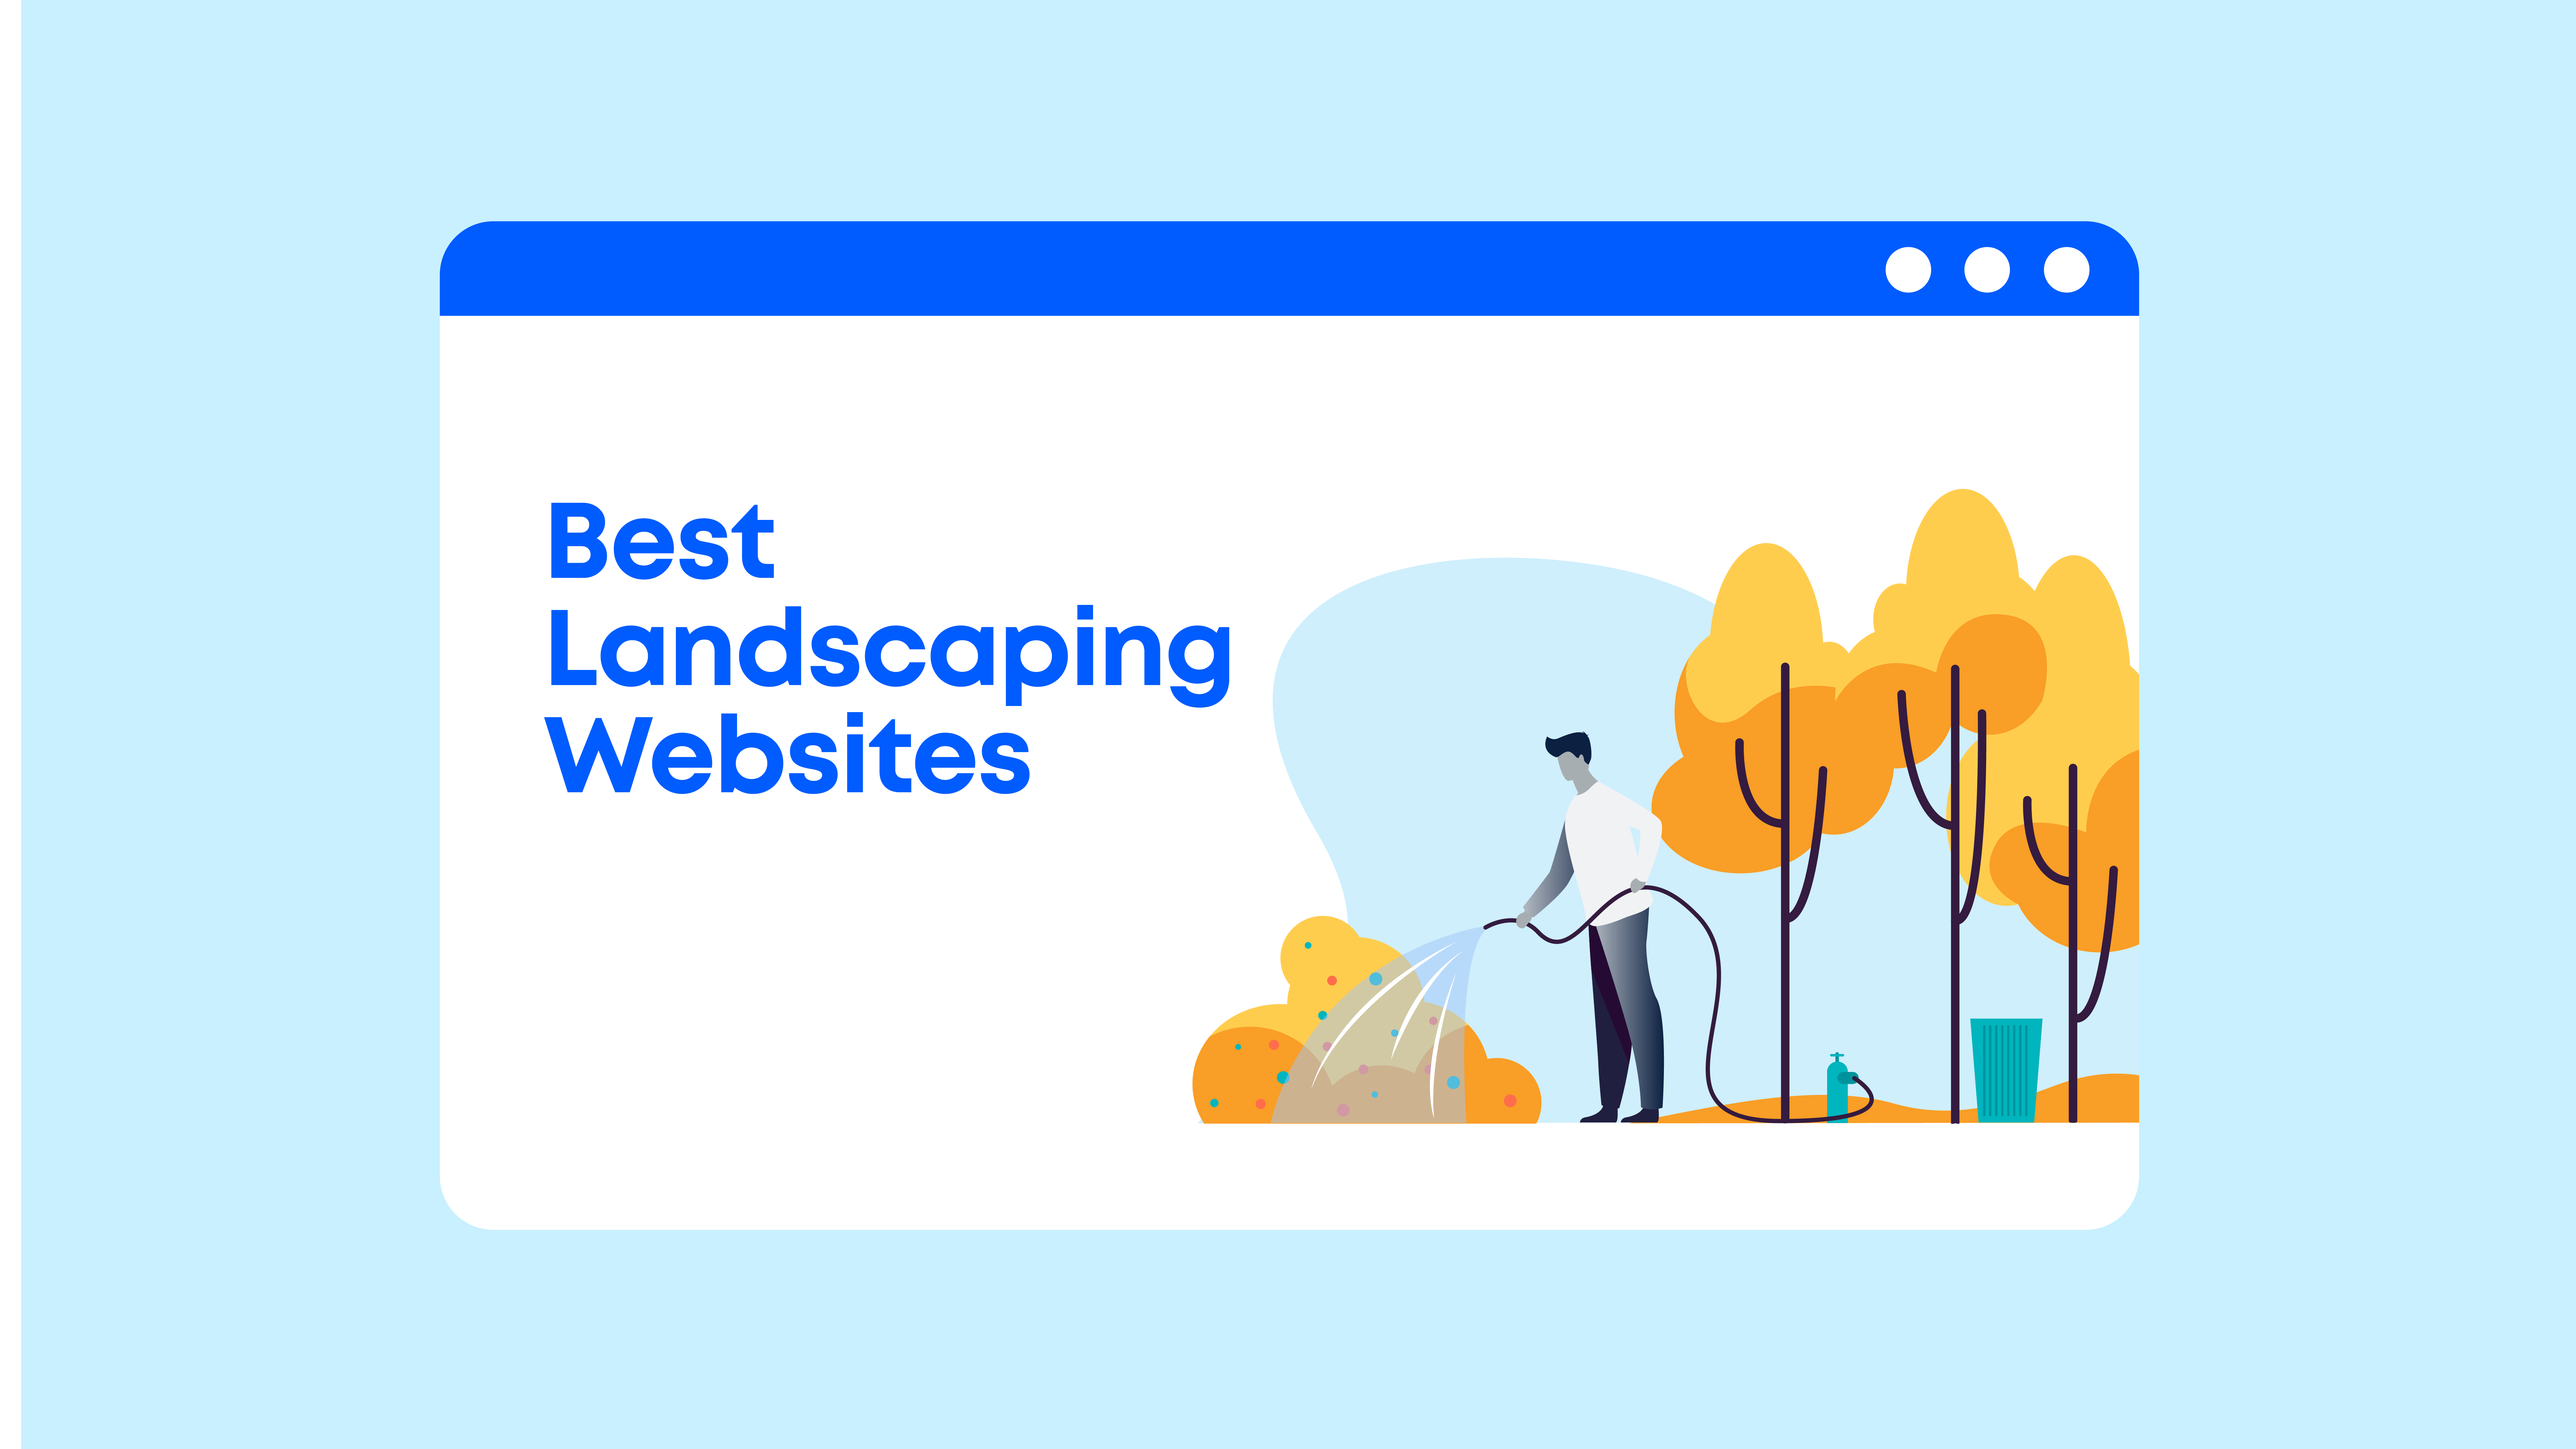 Illustration of landscaping professional watering plants next to the words best landscaping websites.